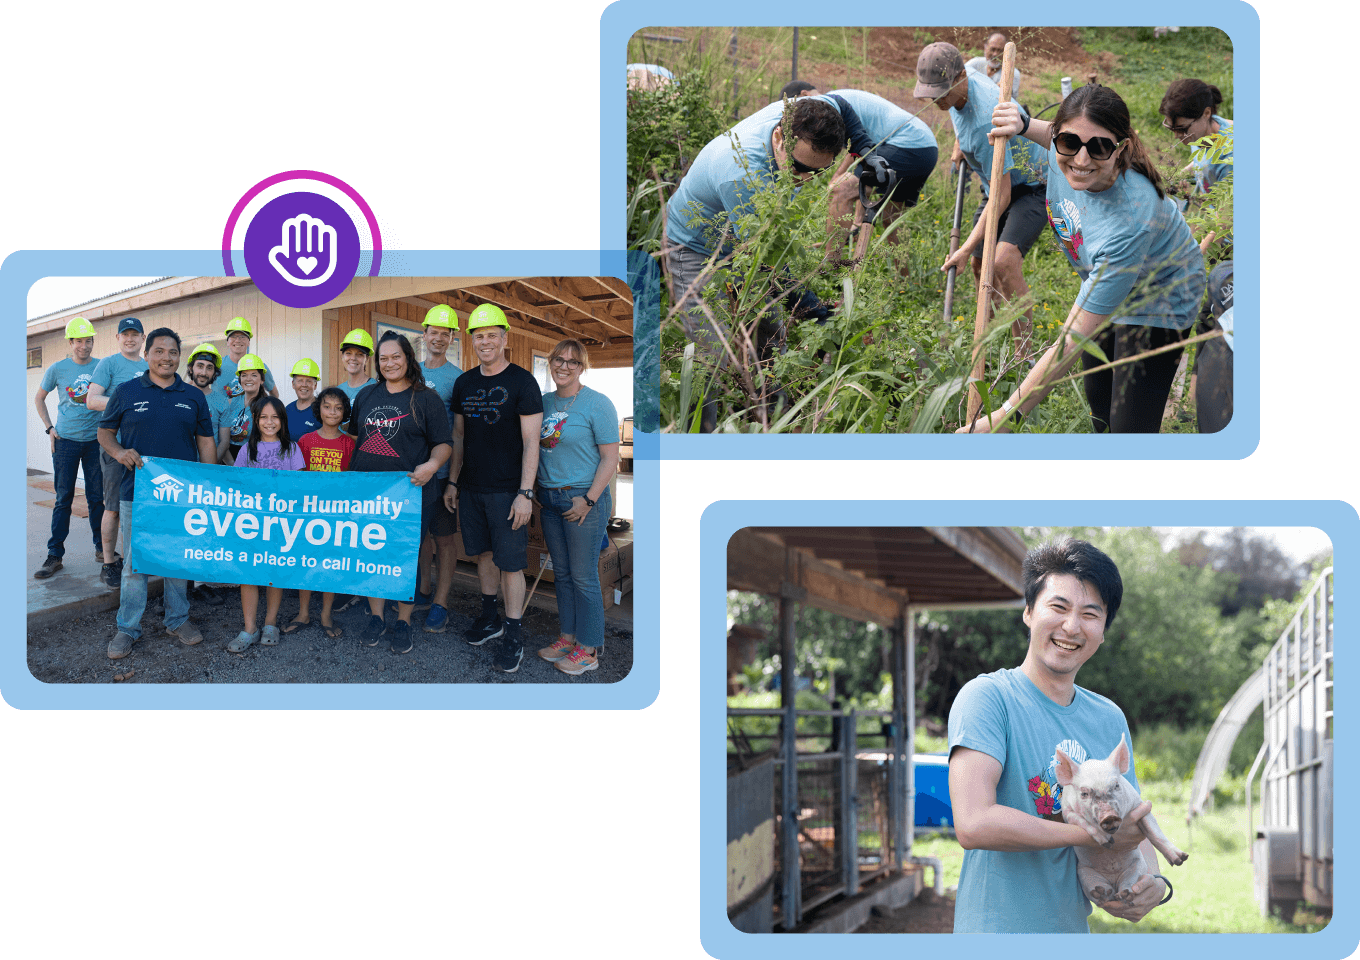 The Aha! team gave back by participating in community service projects on the Big Island. | Photos by Jodi B Photography